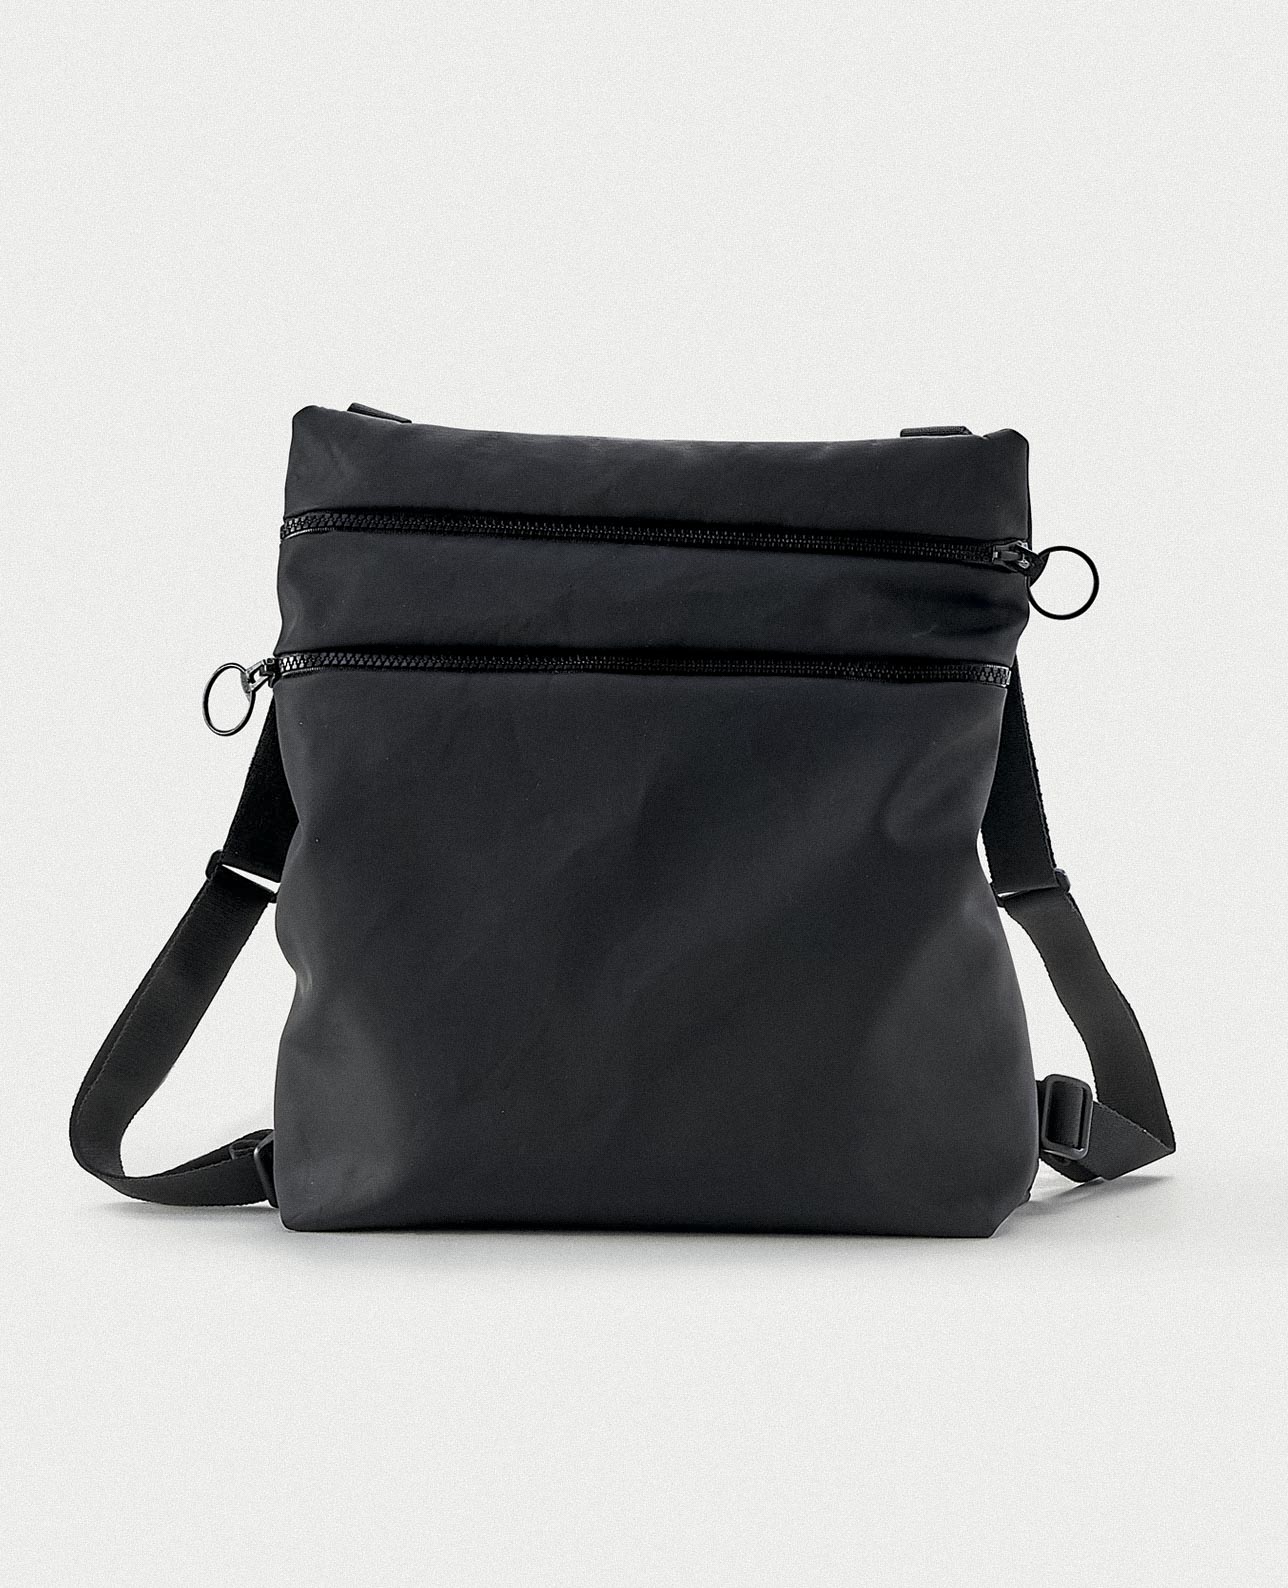 Little black bag, impossible to resist